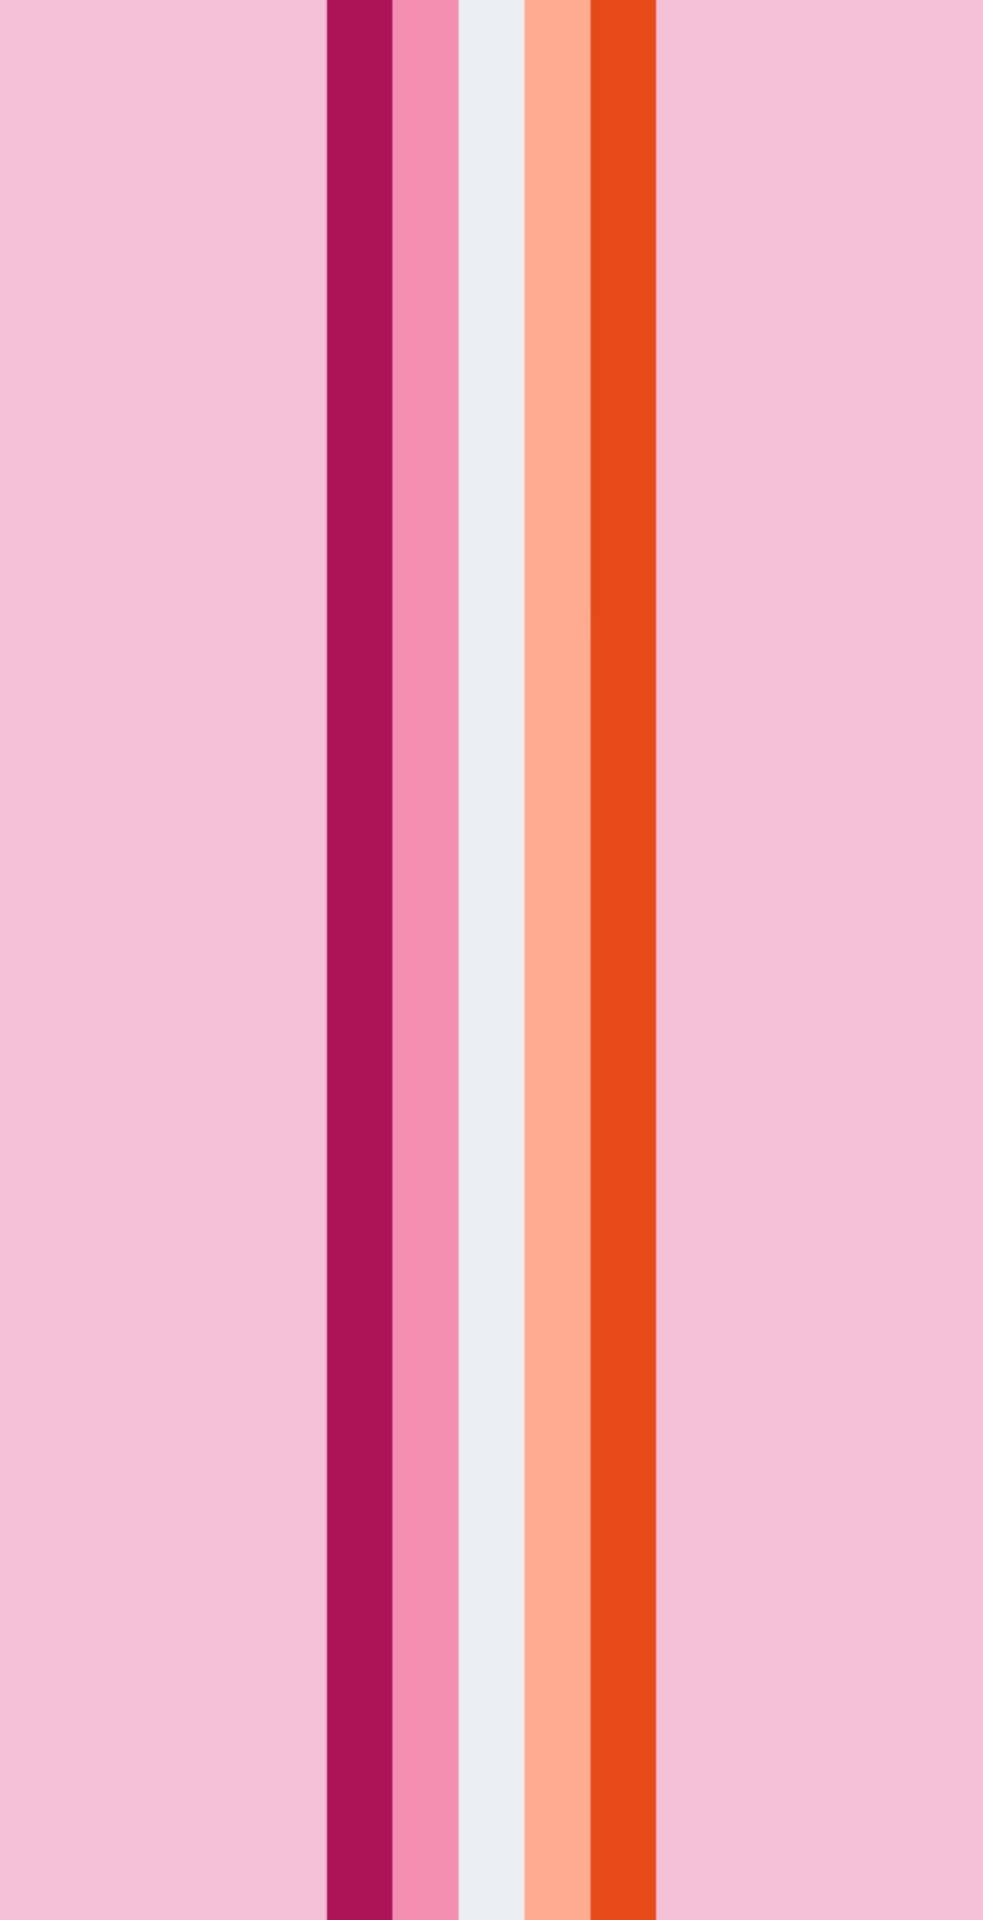 Lesbian Pride Flag With Shades Of Pink Background